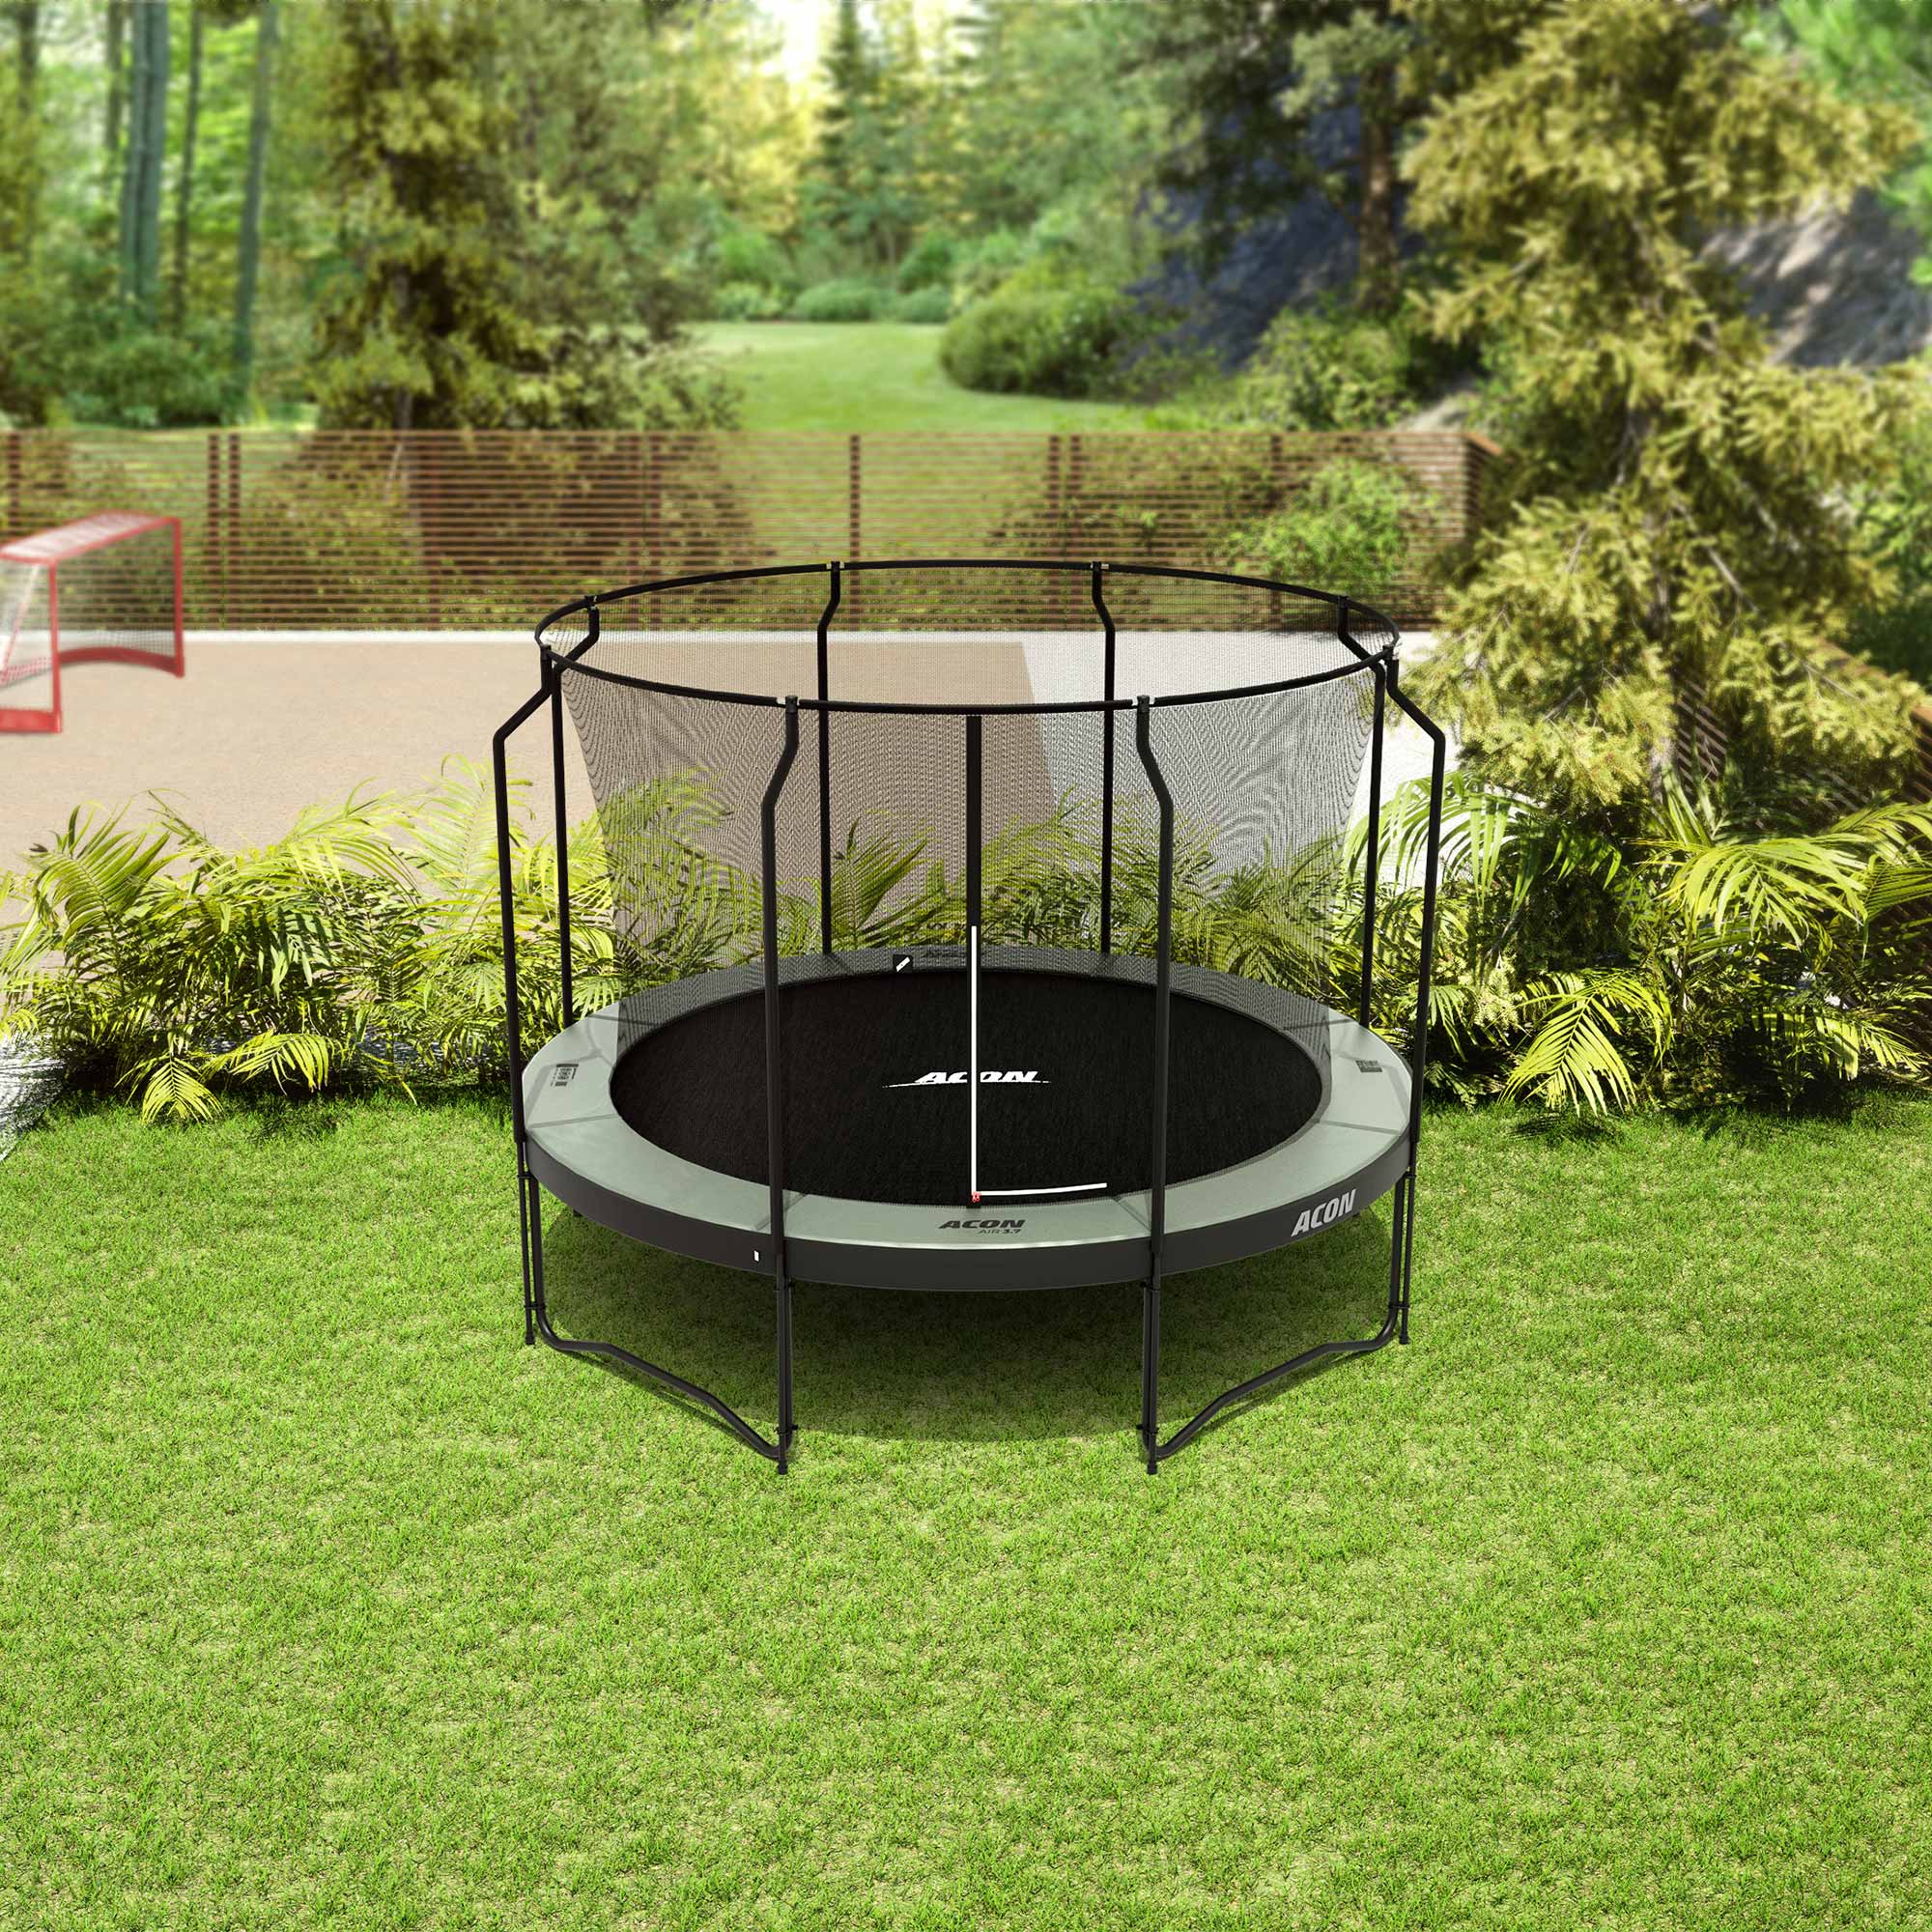 ACON Air 12ft Trampoline with Premium Enclosure in the backyard.